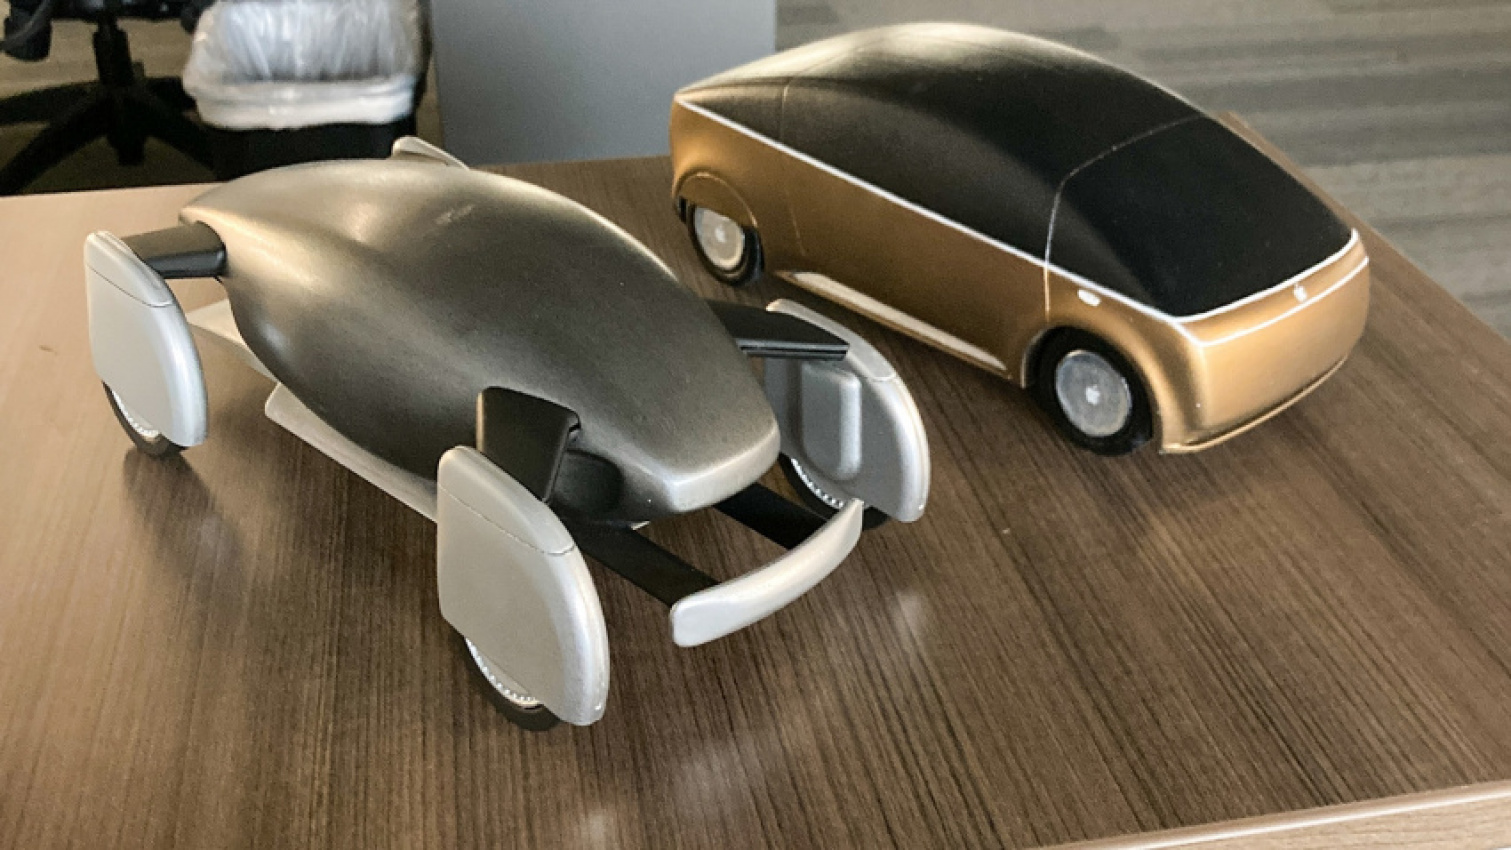 apple, apple car, autos, cars, features, amazon, motortrend's apple car 2.0: how we did it